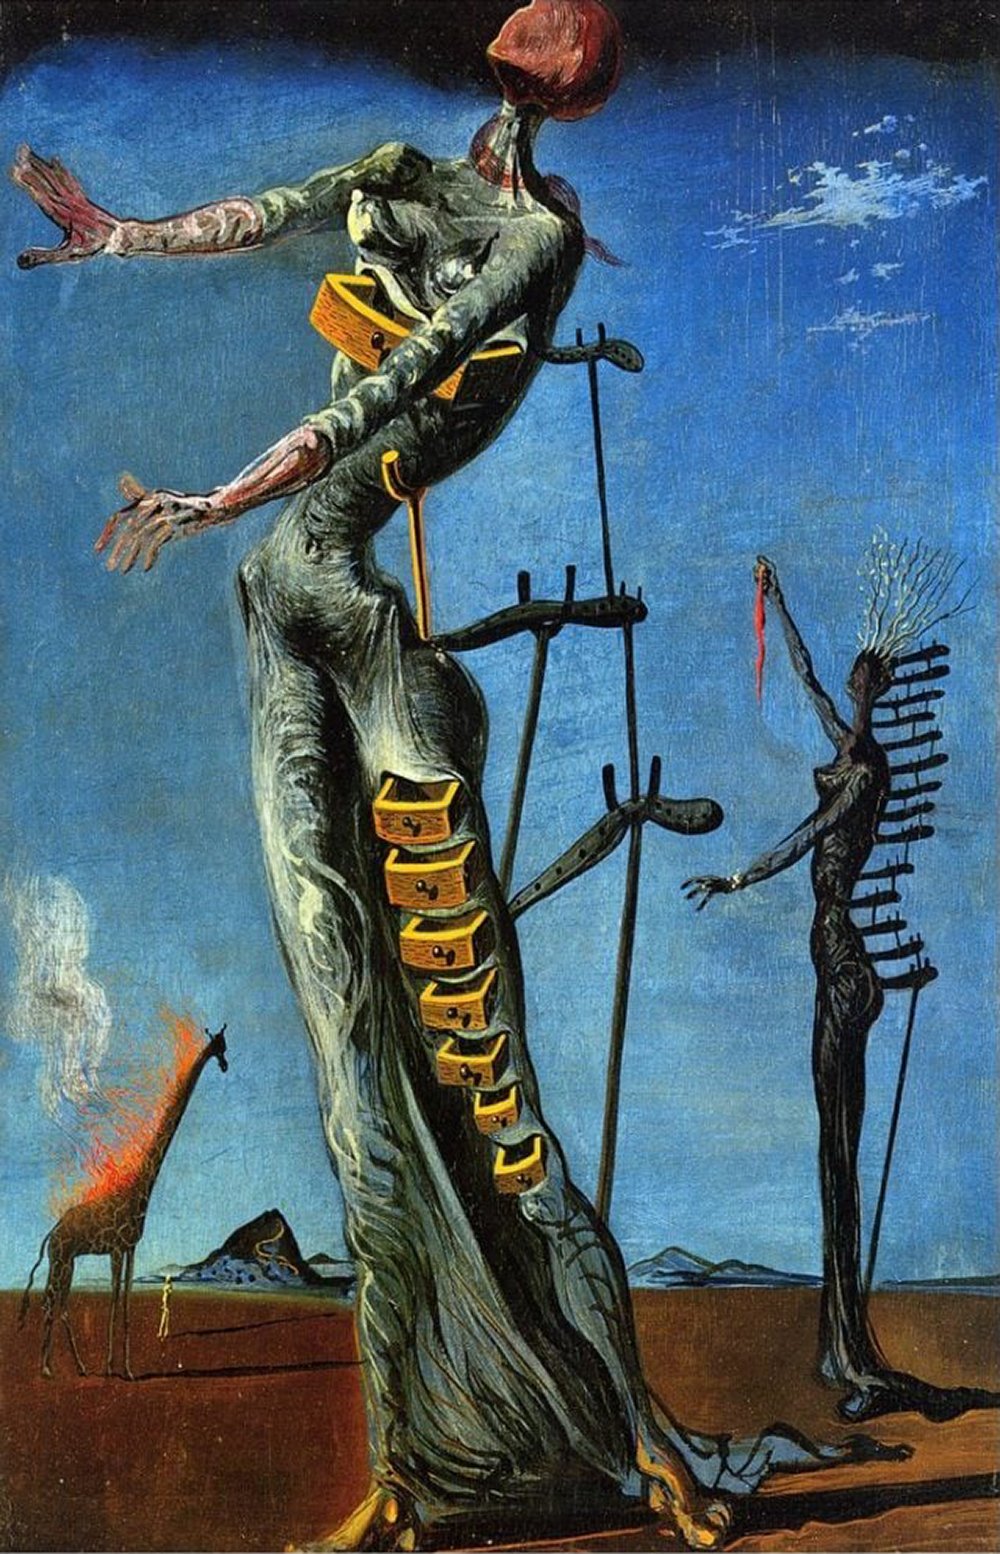 A surrealist painting by Salvador Dali titled “The Burning Giraffe” depicting a tall, elongated figure with a giraffe’s head and a human-like body standing on a ladder-like structure with a smaller figure on the right side. The background is a dark blue sky with a red horizon. The painting is known for its themes of death and decay, and is considered a premonition of the Second World War.